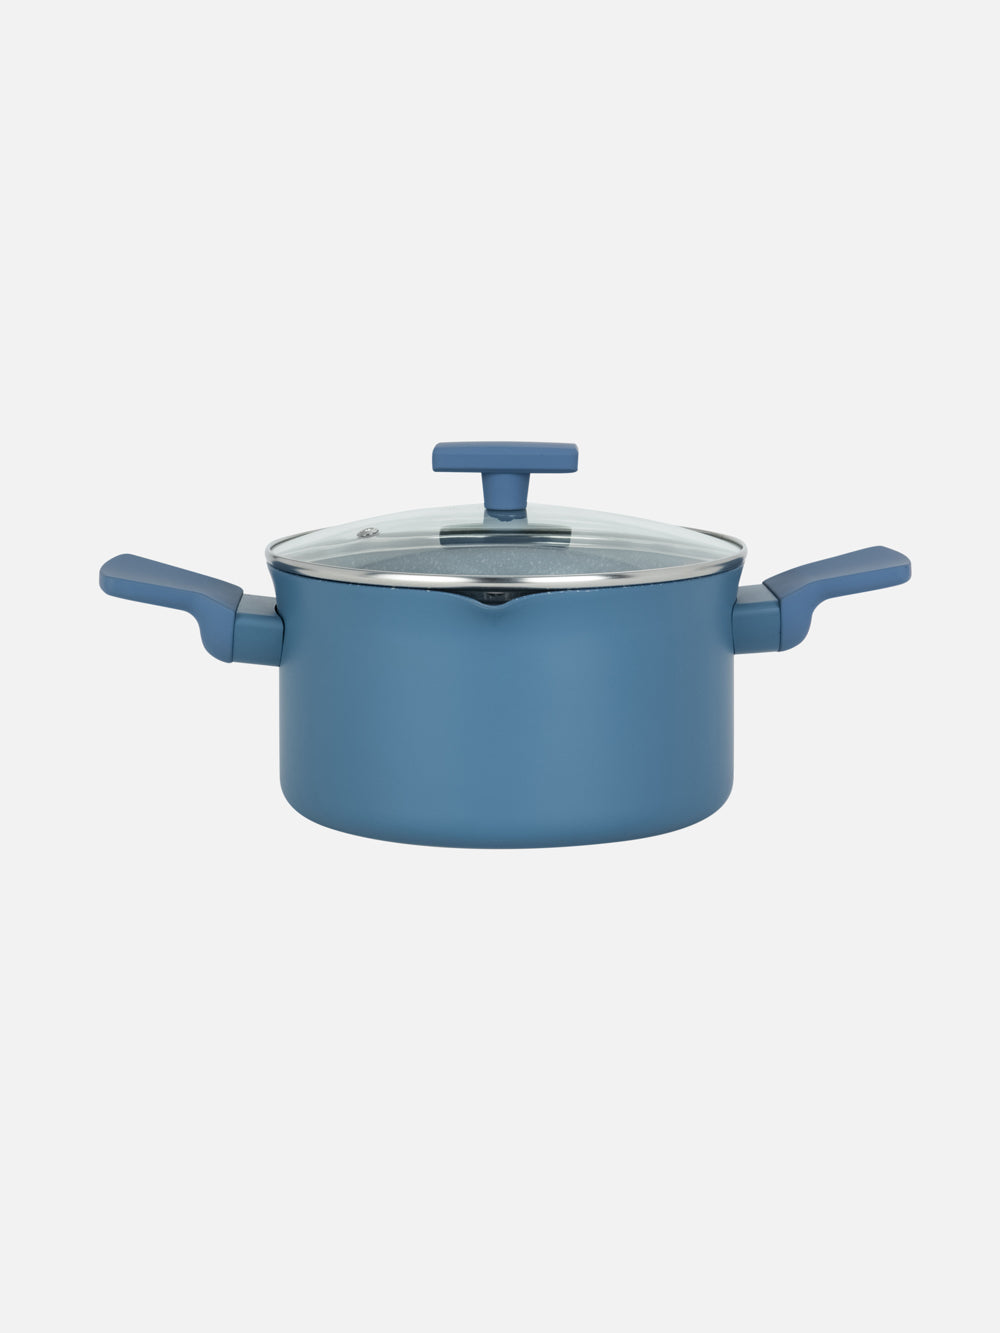 Lucia 7.8" Nonstick Pot with Lid